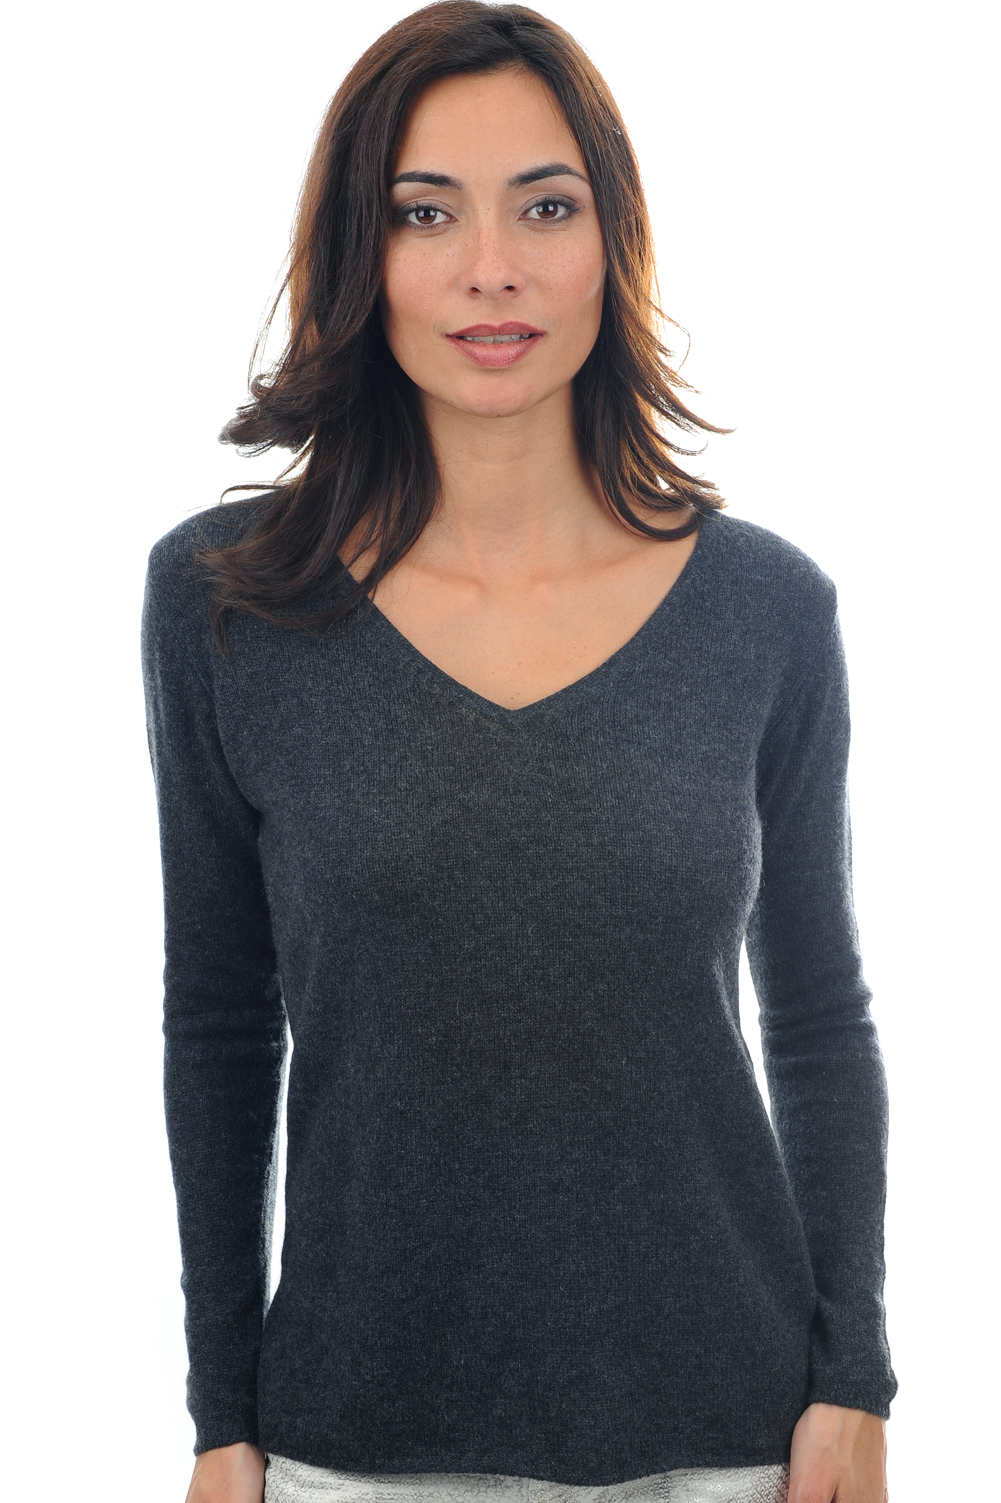 Cashmere ladies basic sweaters at low prices flavie charcoal marl 2xl